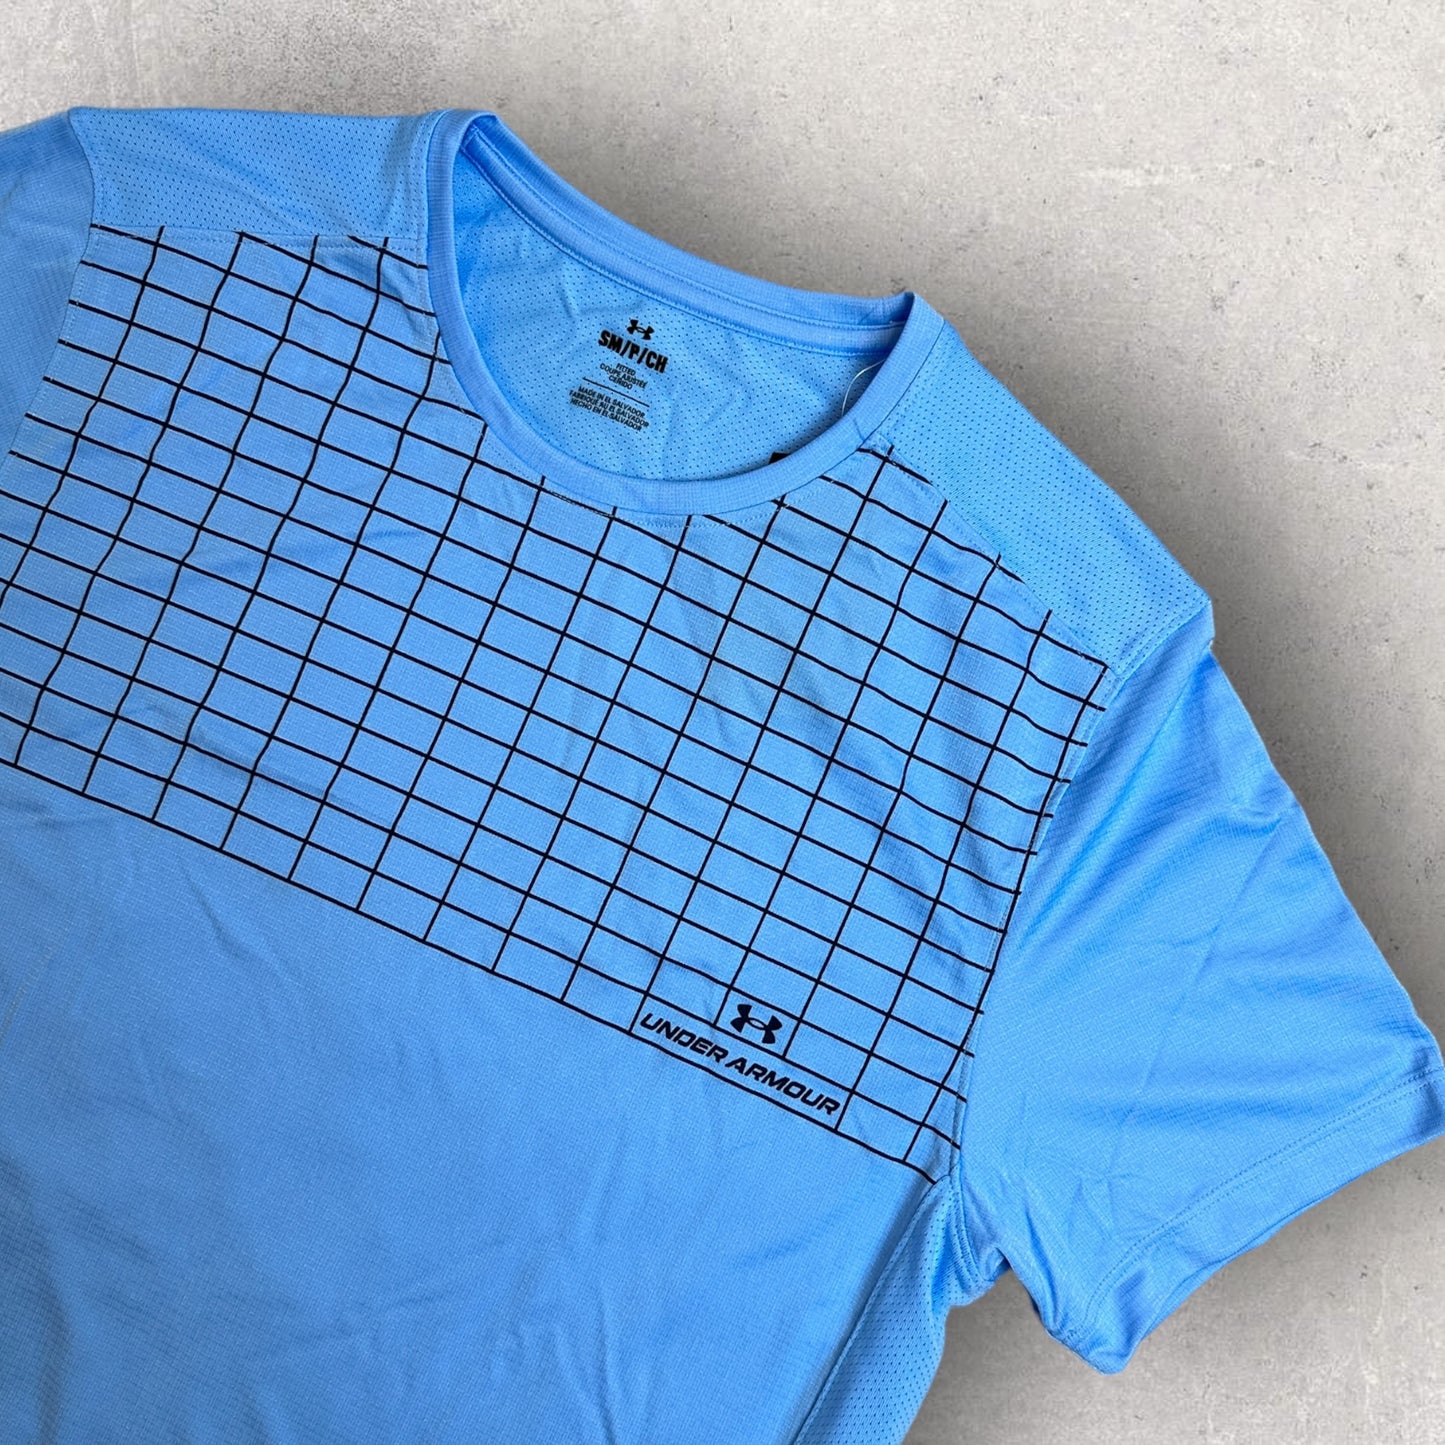 UNDER ARMOUR GRAPHIC T-SHIRT - BABY BLUE